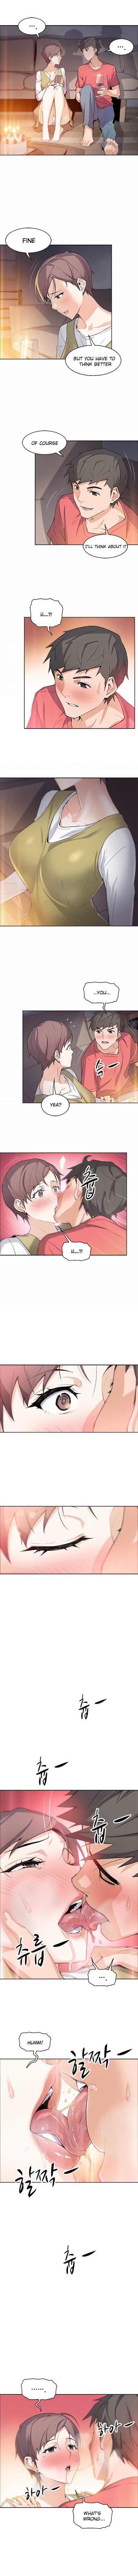 All Housekeeper [Neck Pillow, Paper] Ch.49/49 [English] [Manhwa PDF] Completed Hot Blow Jobs - Page 5